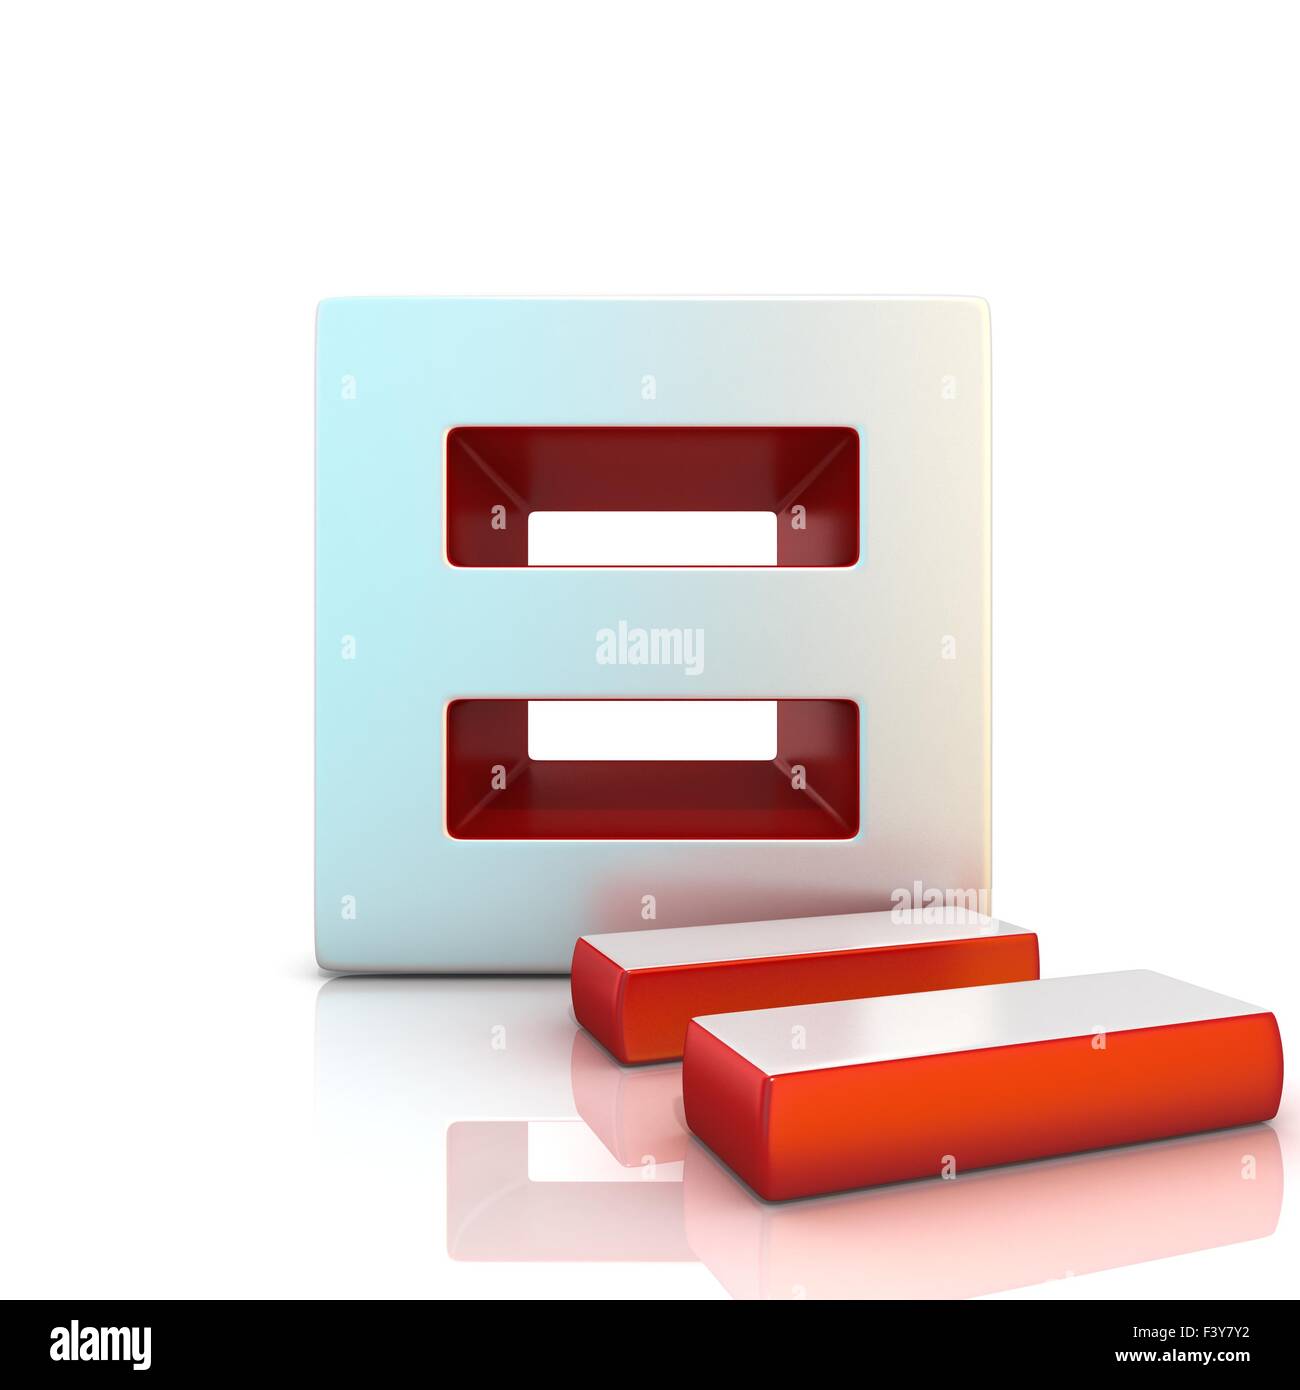 Equally sign. 3D render illustration, isolated on white. Front view Stock Photo